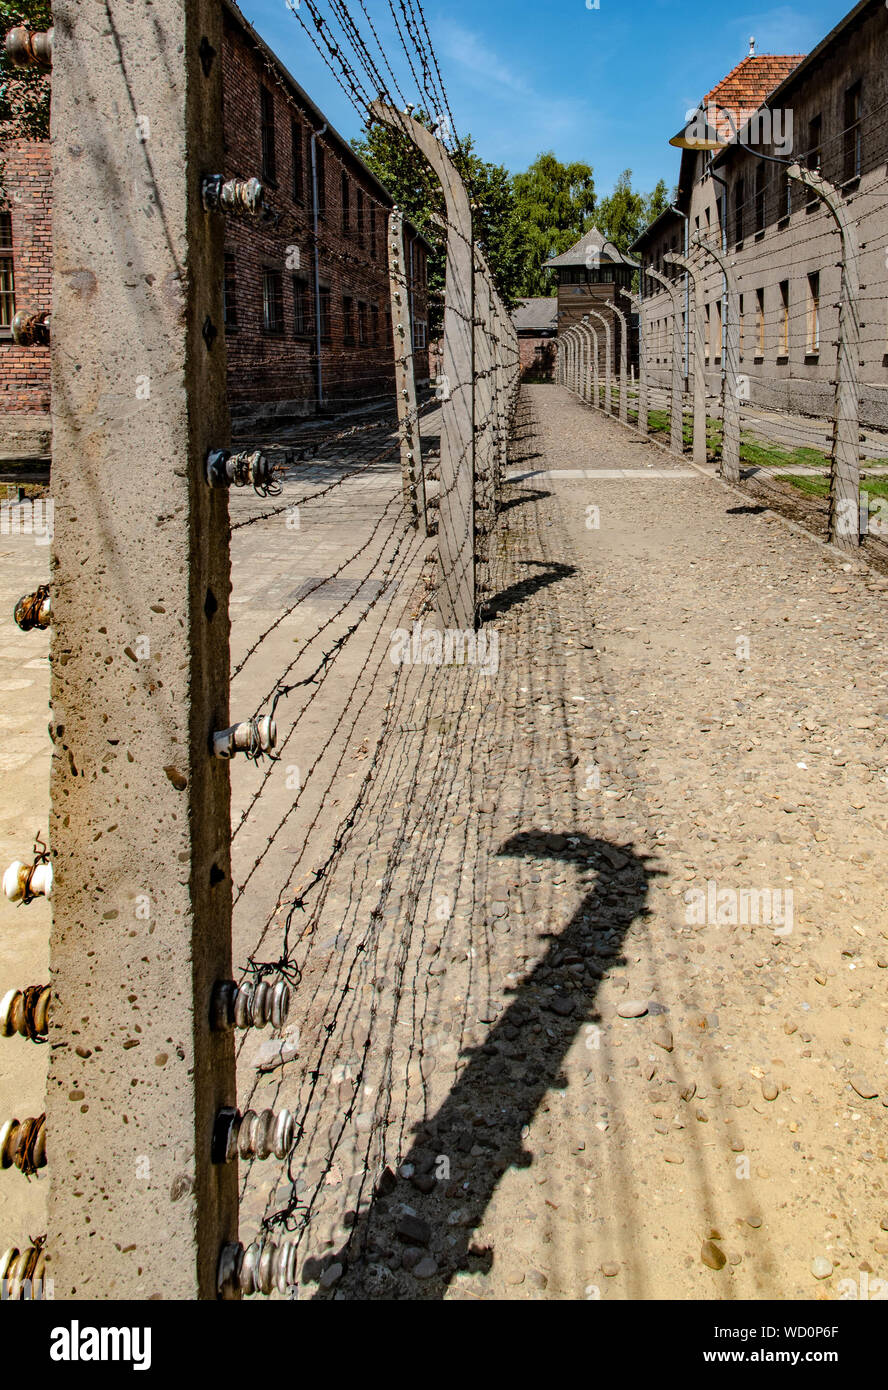 Scenes from Concentration camps at Auschwitz and Birkenau Stock Photo